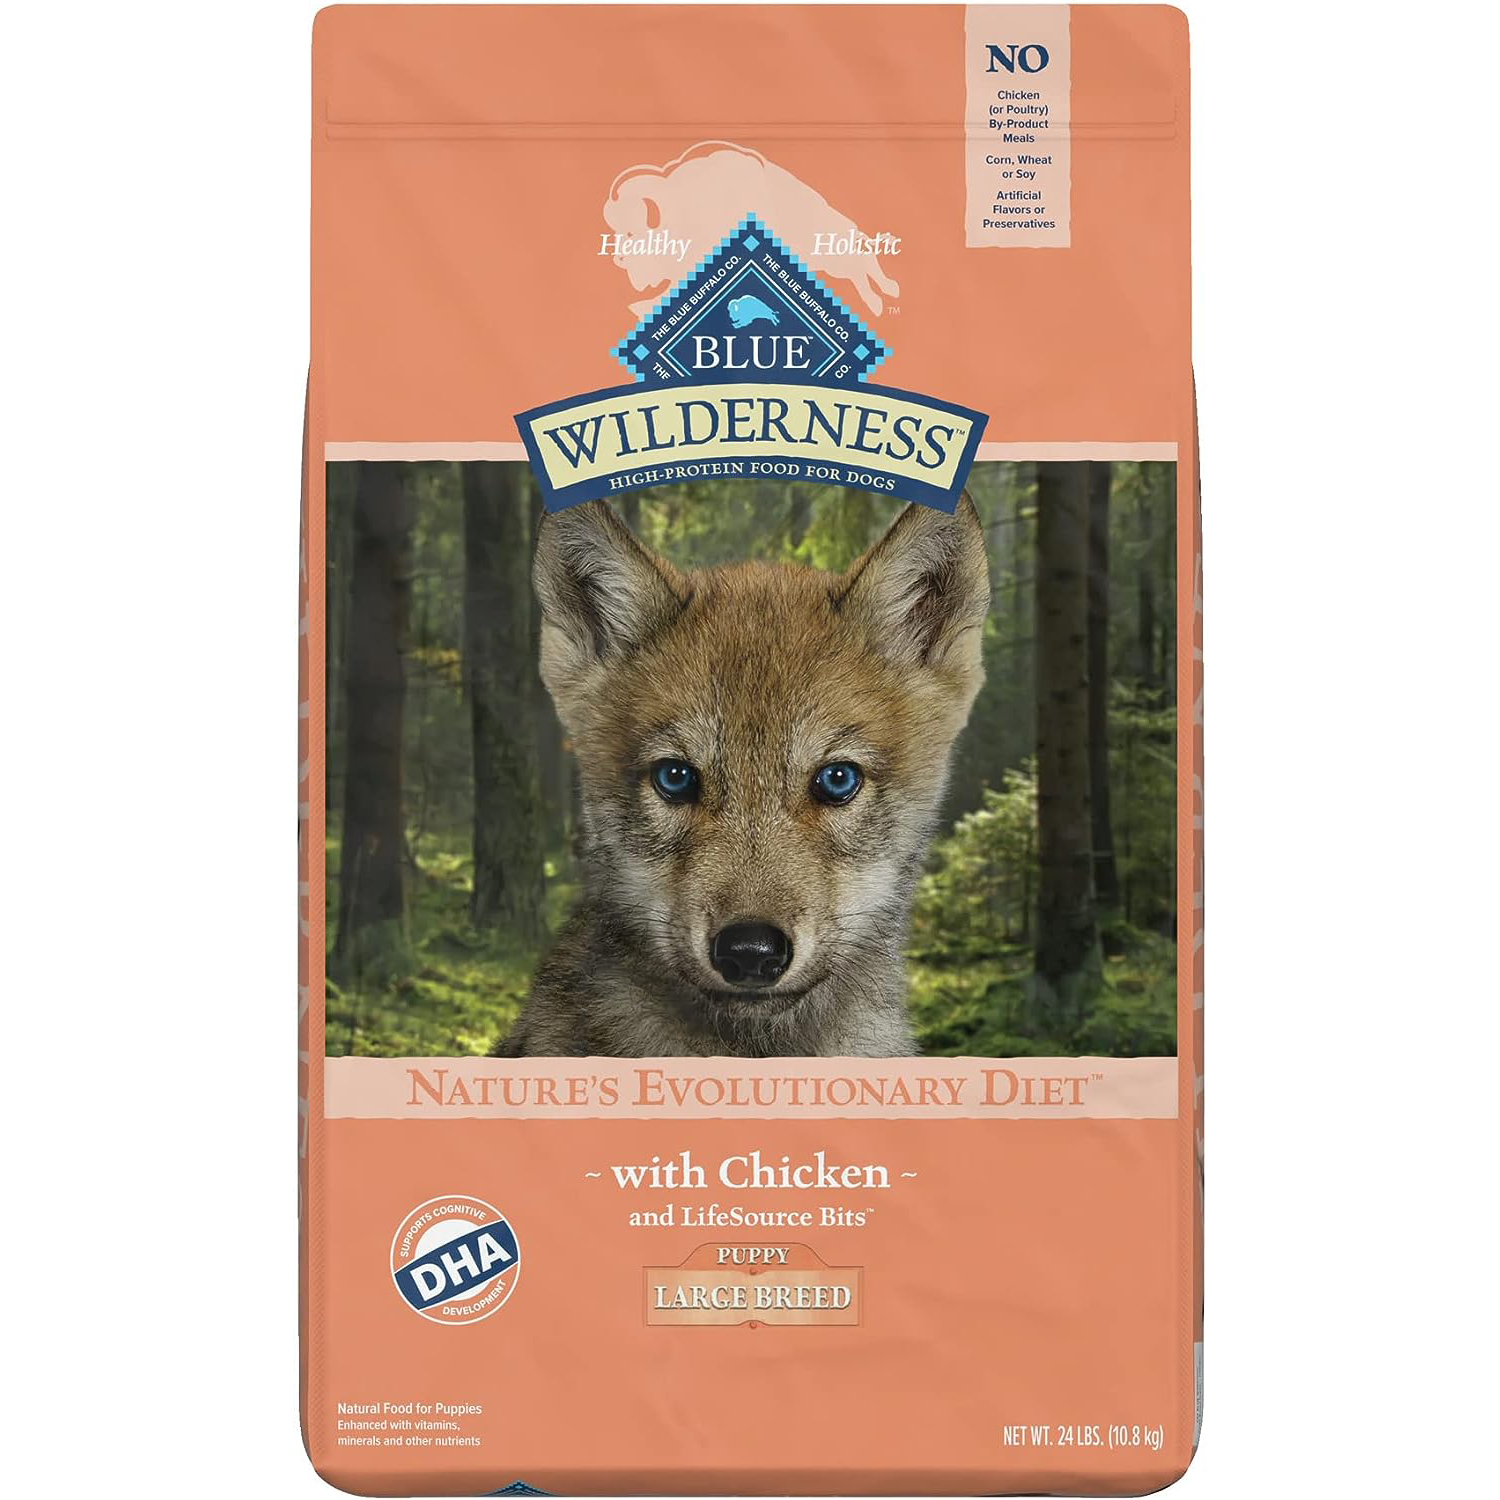 Blue Buffalo Wilderness High Protein, Natural Puppy Large Breed Dry Dog Food 